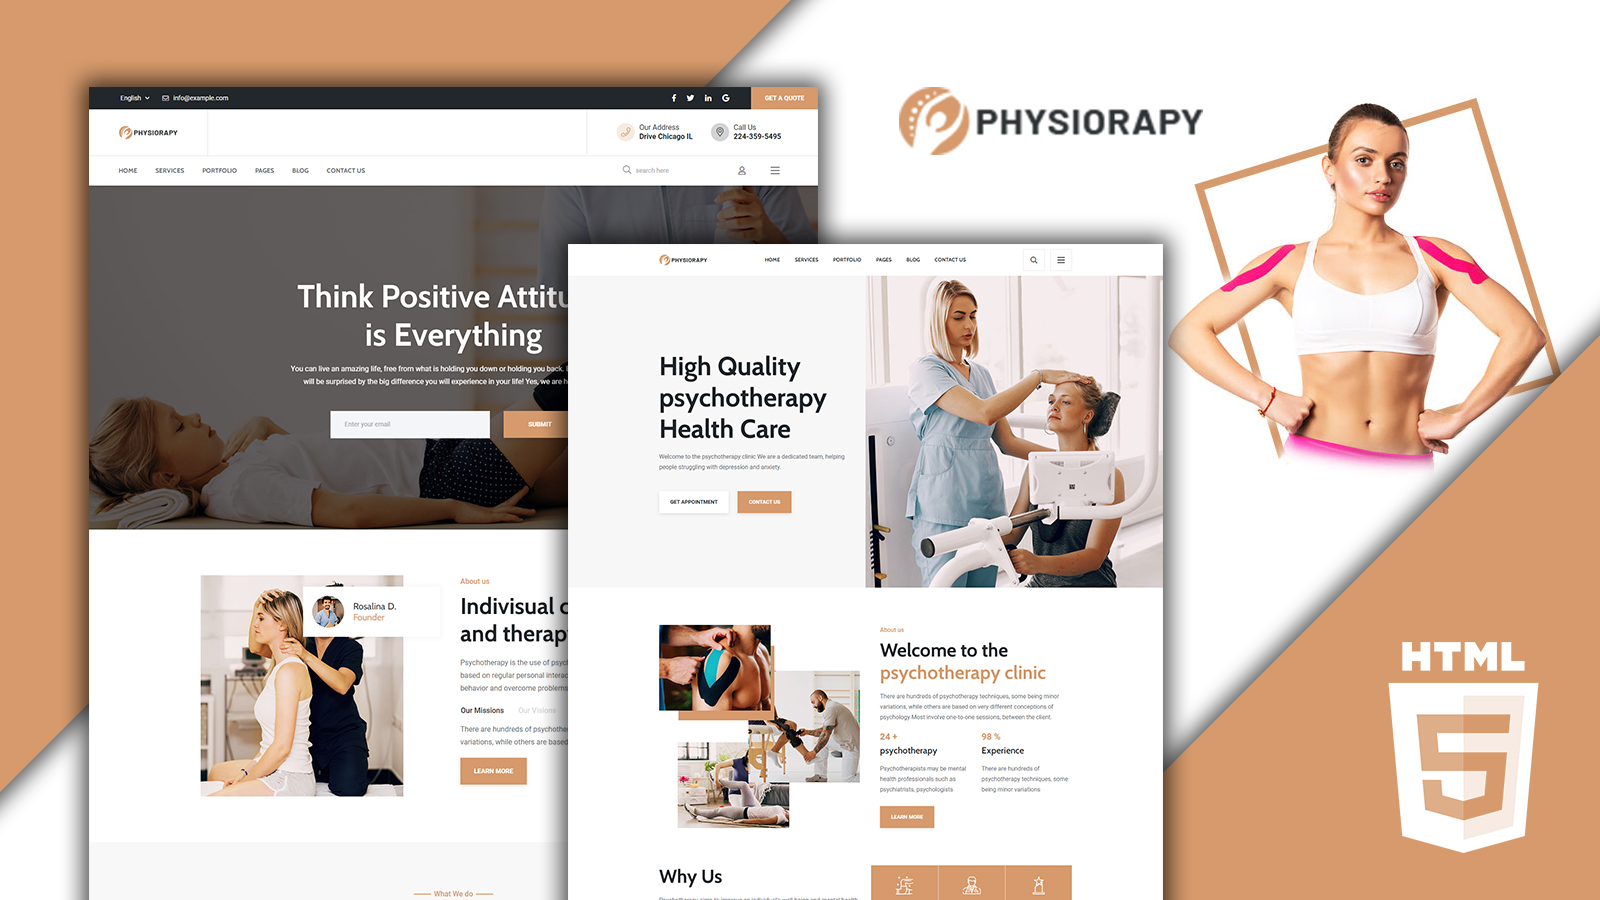 Physiorapy Physiotherapy Medical Website Template